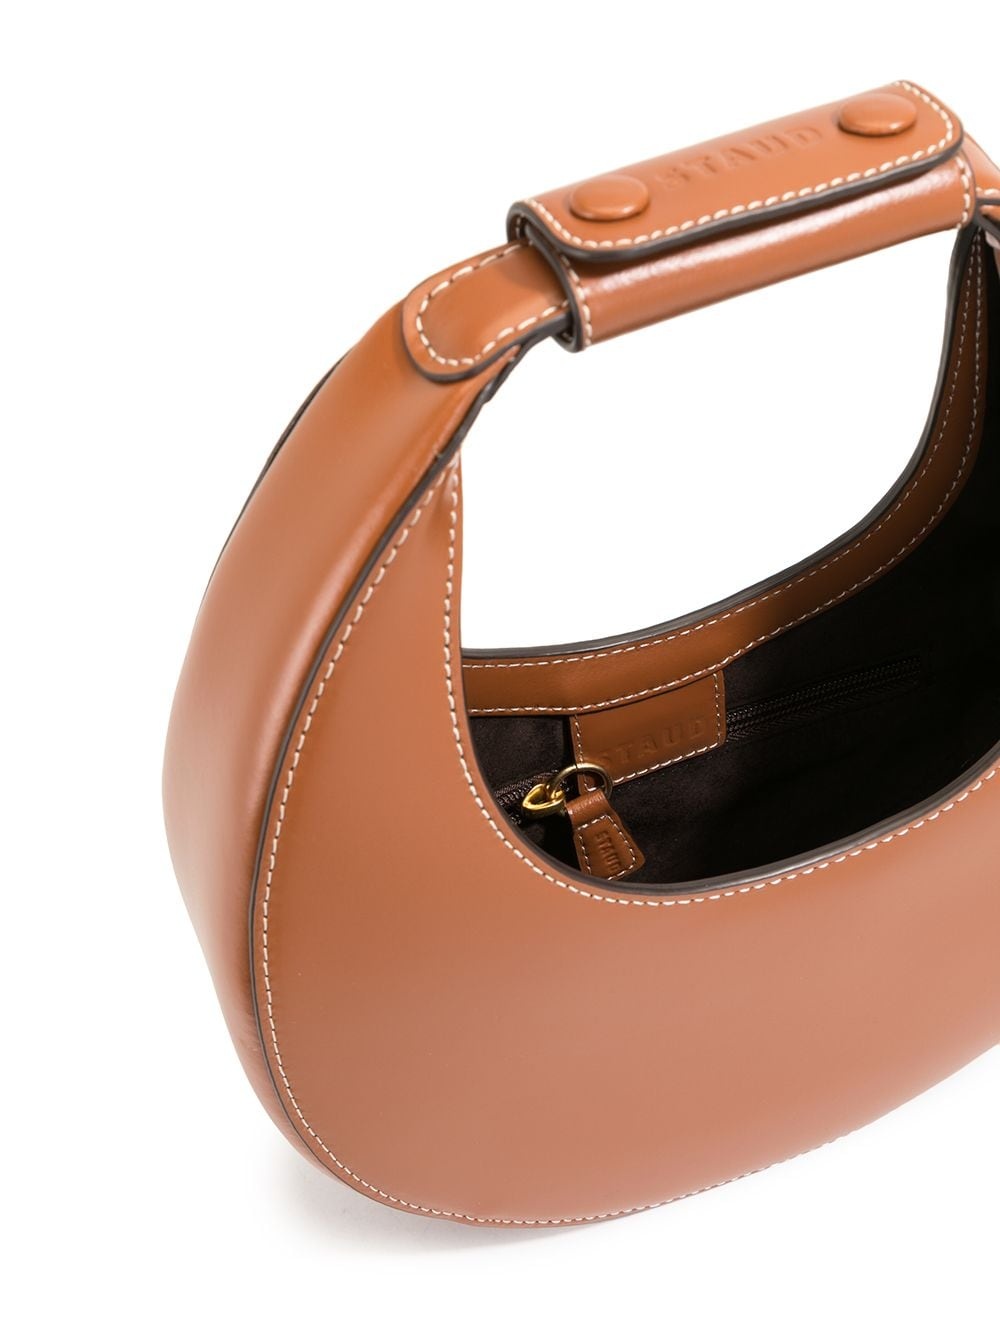 Moon small leather shoulder bag - 5